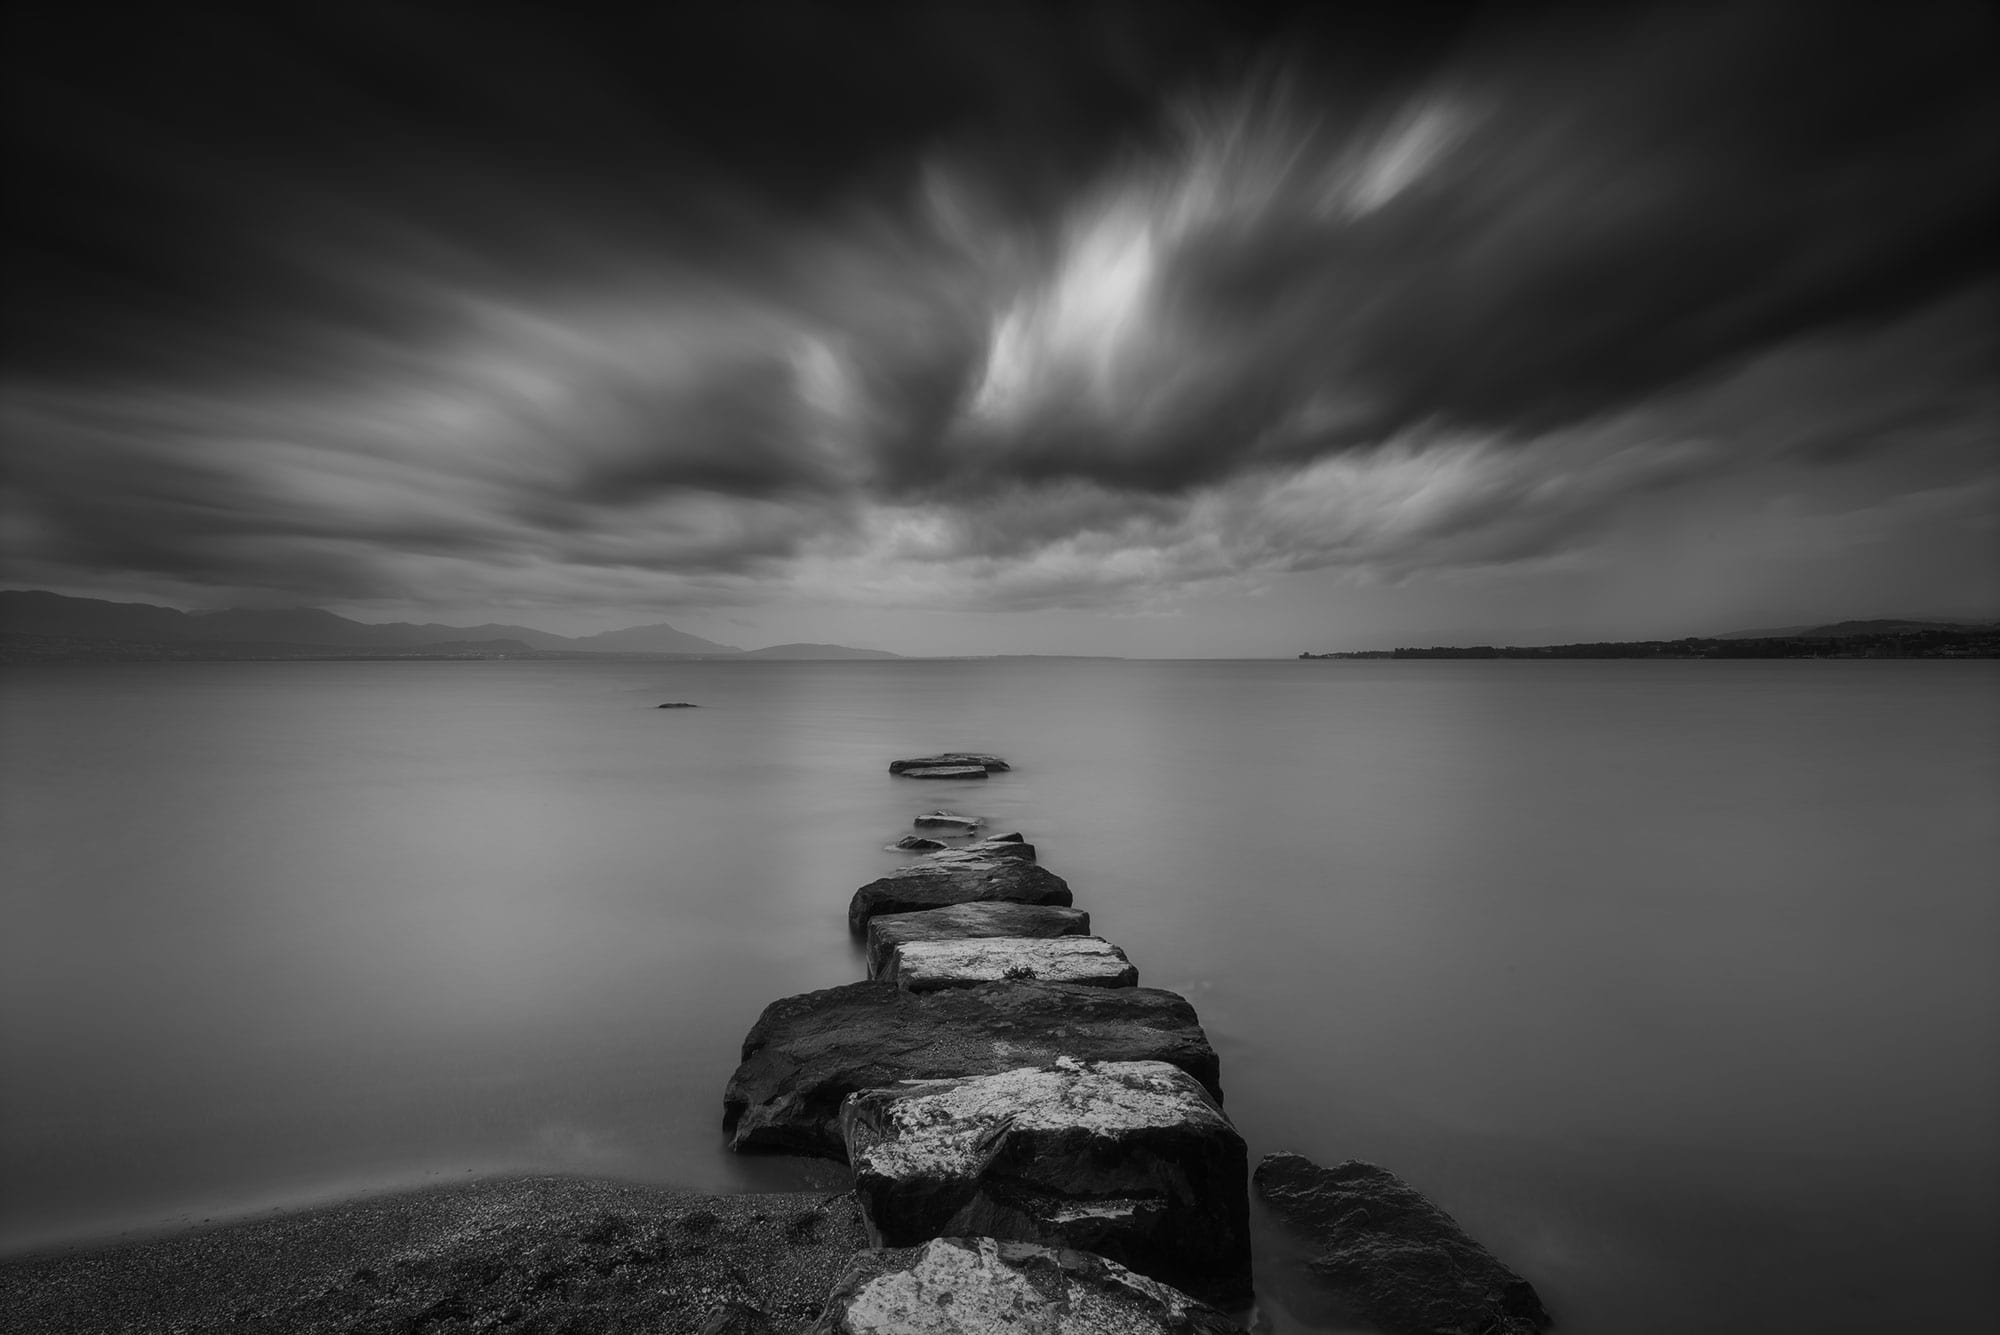 Dive into the captivating world of long exposure black and white photography through the lens of Swiss photographer Jennifer Esseiva. Witness the raw power of nature as she captures a tumultuous storm at Préverenges Beach, Lake Geneva. Each frame is a masterclass in landscape photography, revealing the dramatic interplay between light and shadow in this mesmerizing monochrome composition. Experience the dynamic beauty of Switzerland in the throes of a storm, expertly captured by Jennifer's lens.